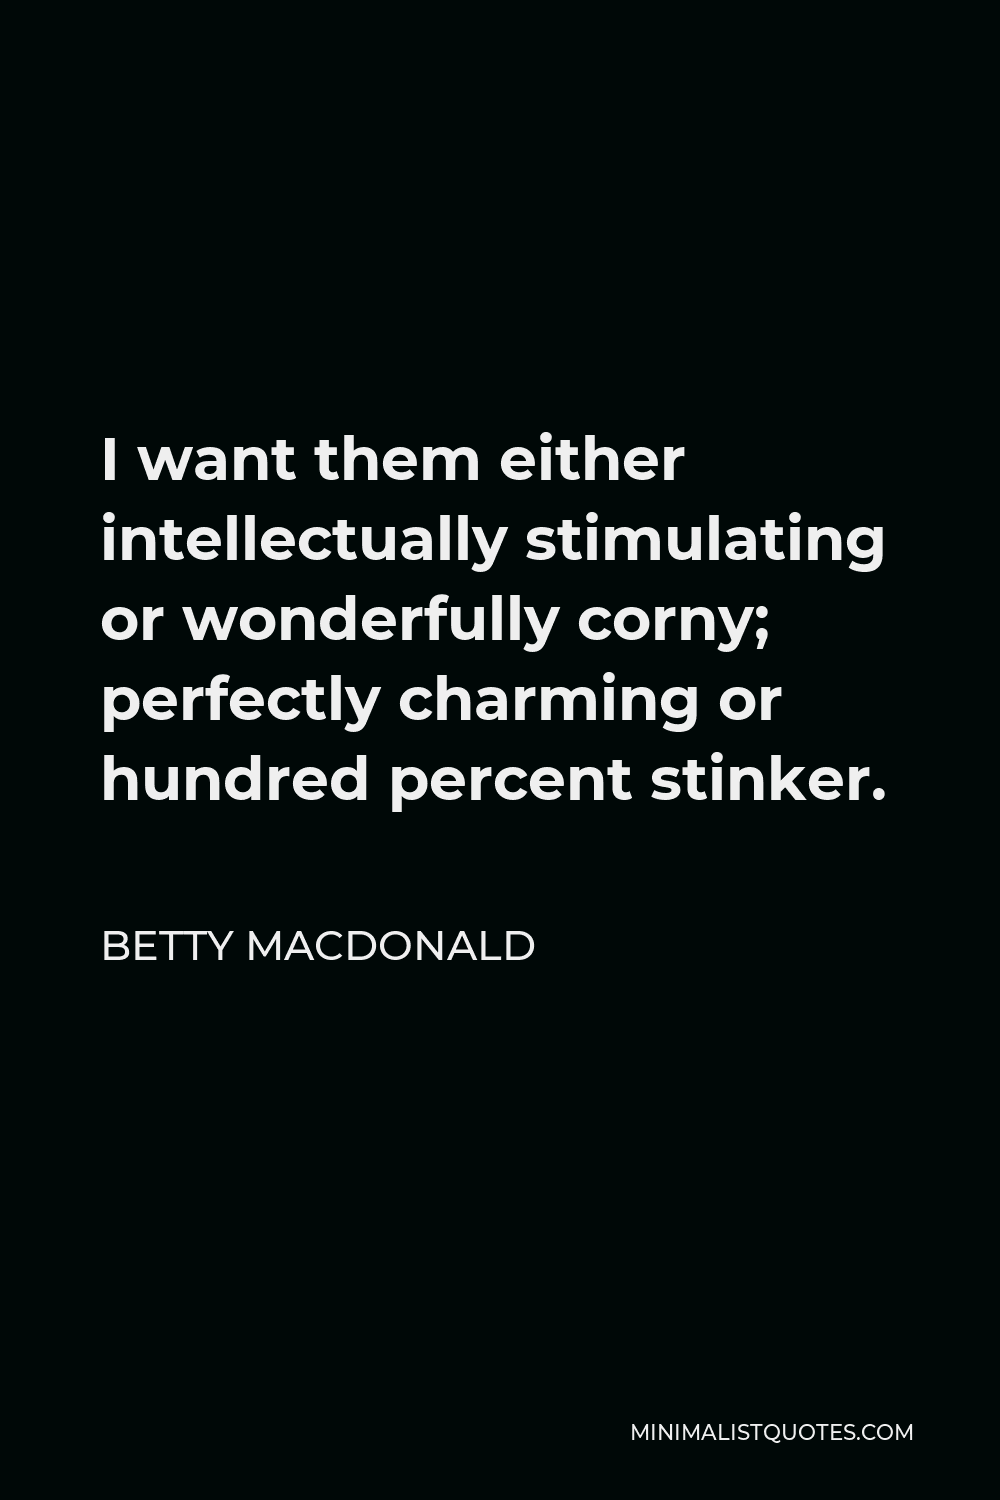 Betty MacDonald Quote - I want them either intellectually stimulating or wonderfully corny; perfectly charming or hundred percent stinker.